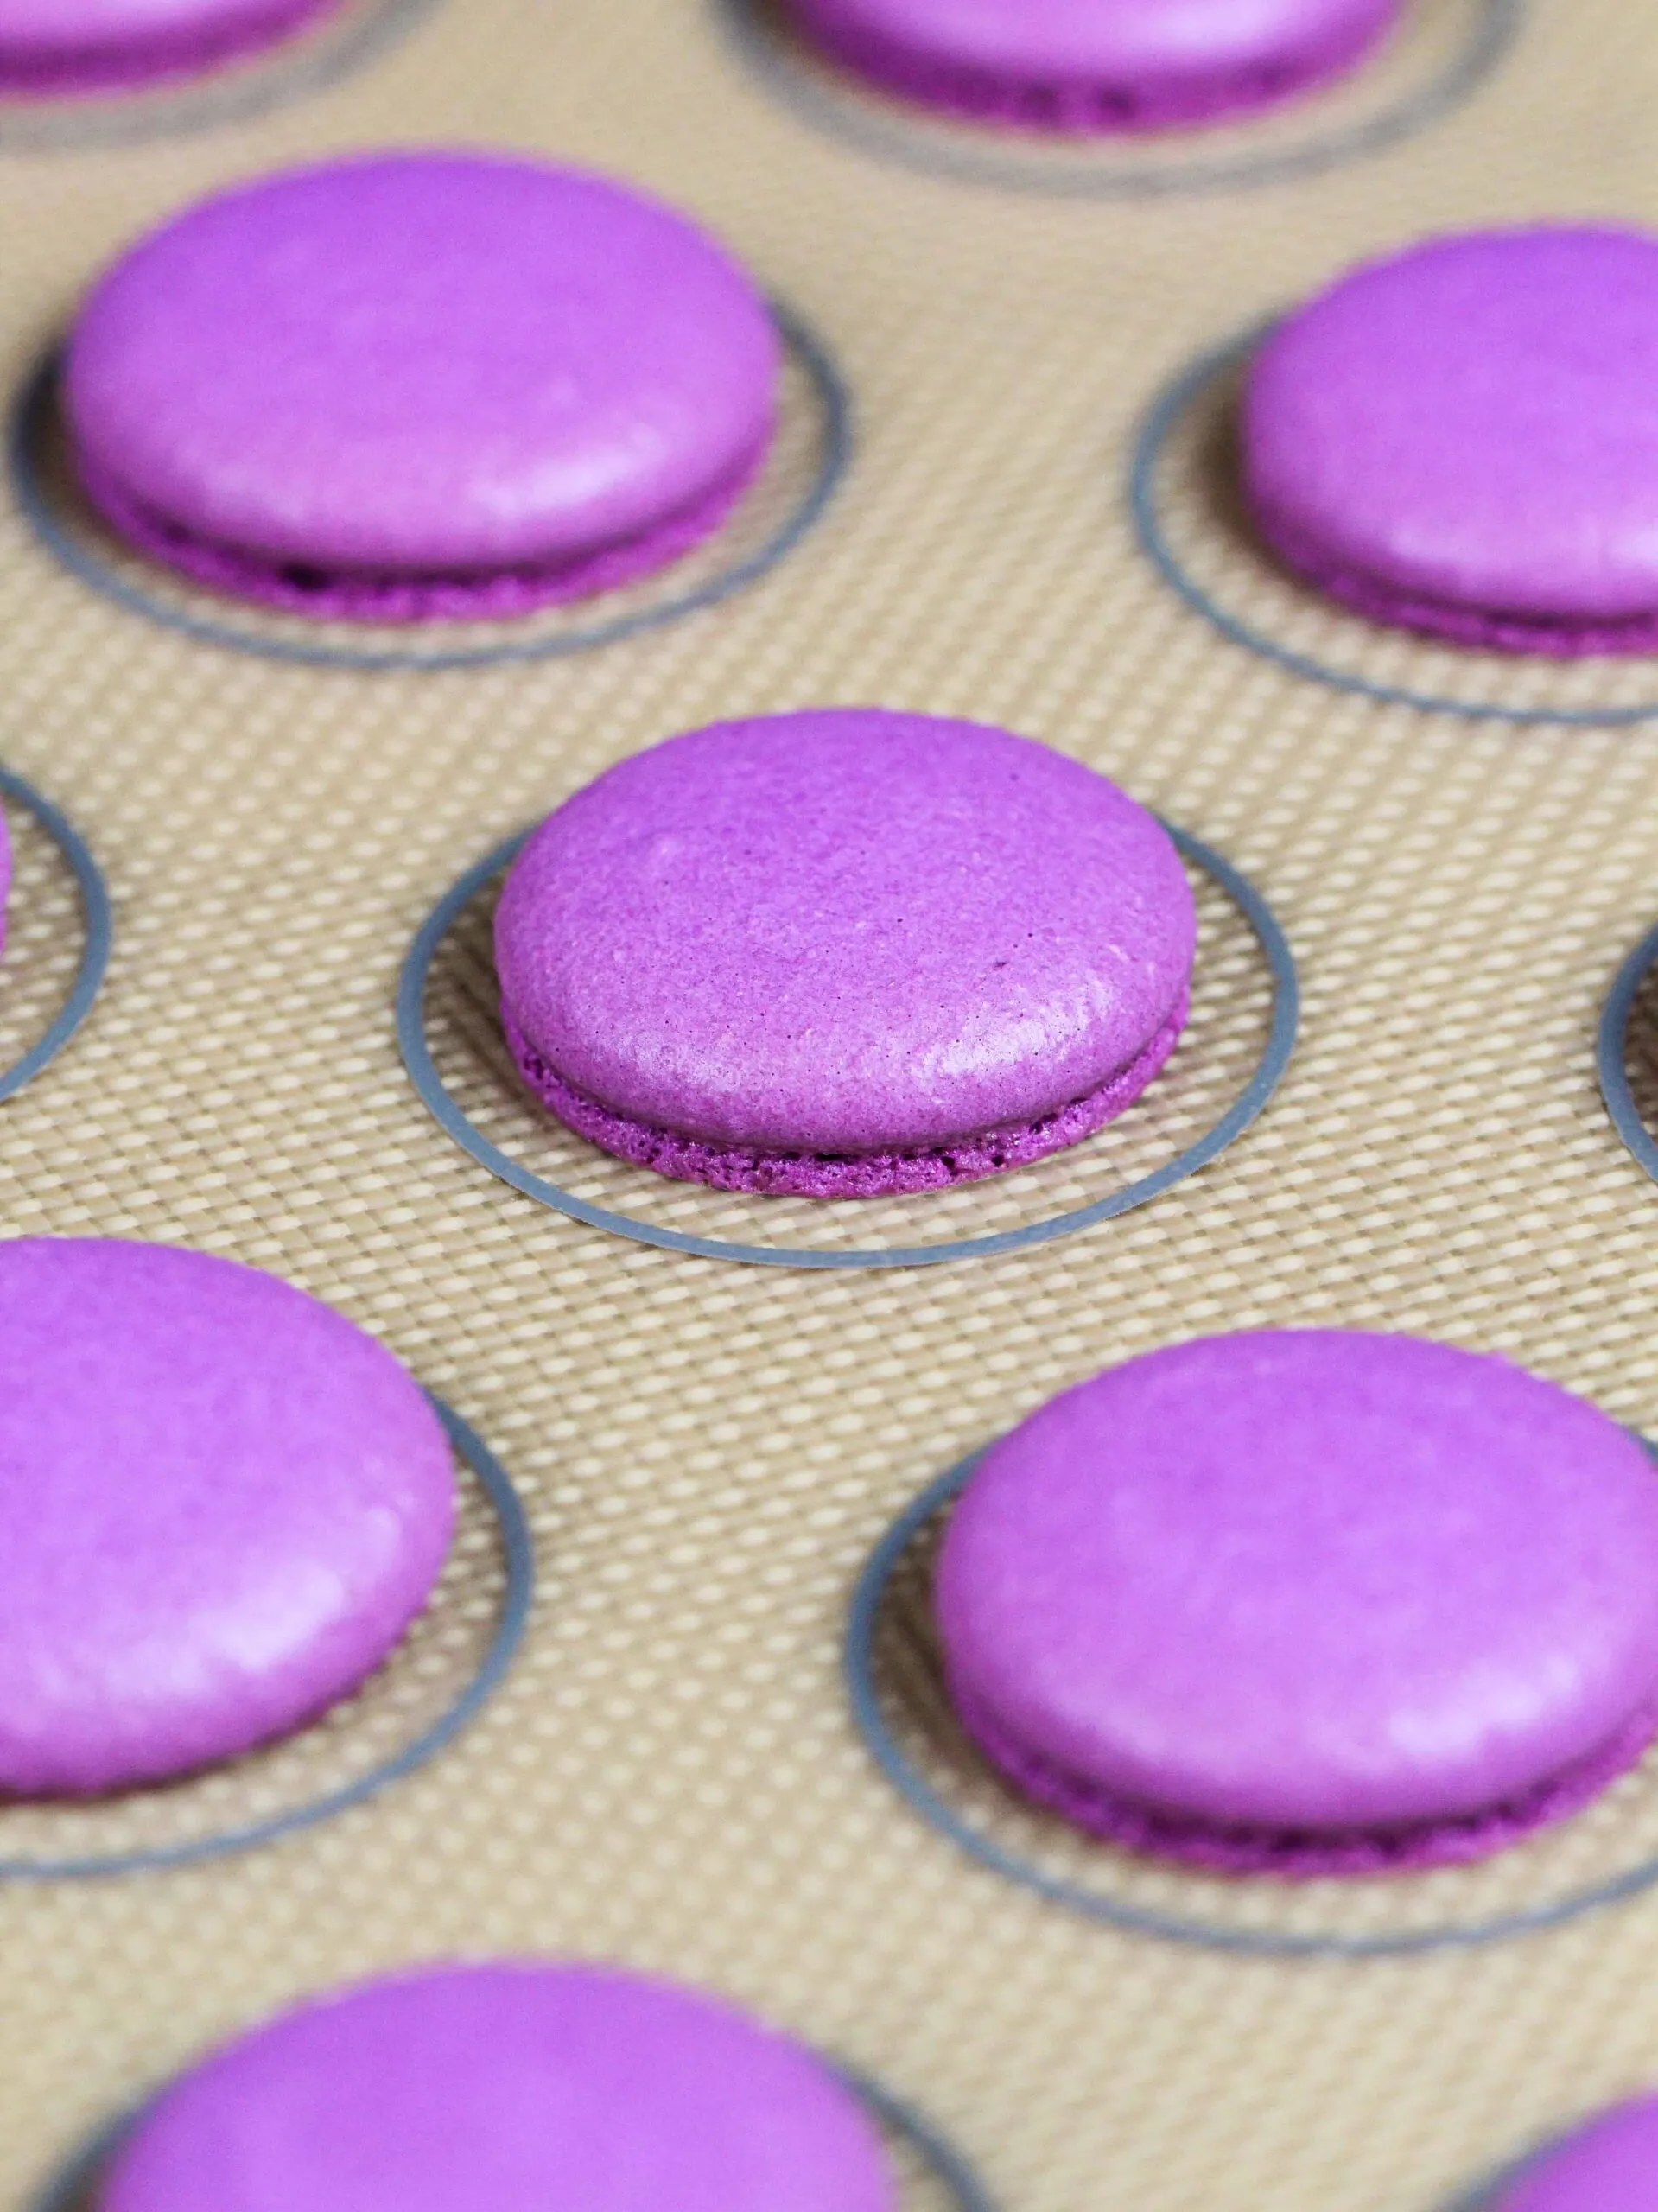 image of purple french macaron shells that have been baked and developed perfect feet